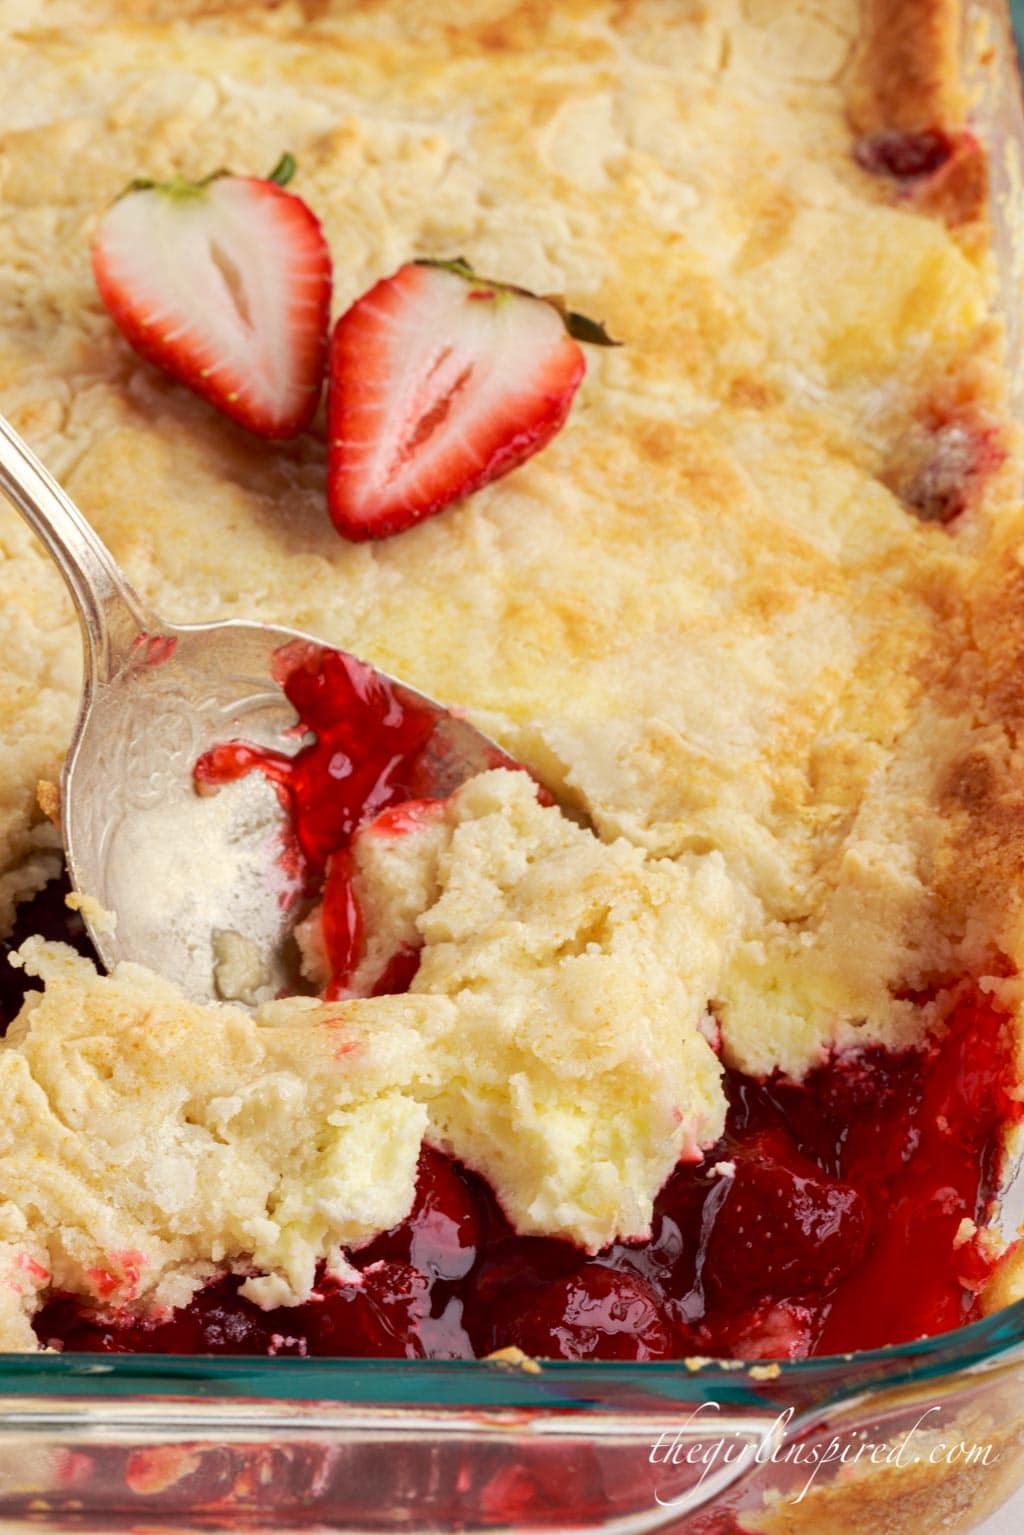 Strawberry cheesecake dump cake in a glass baking dish with serving spoon